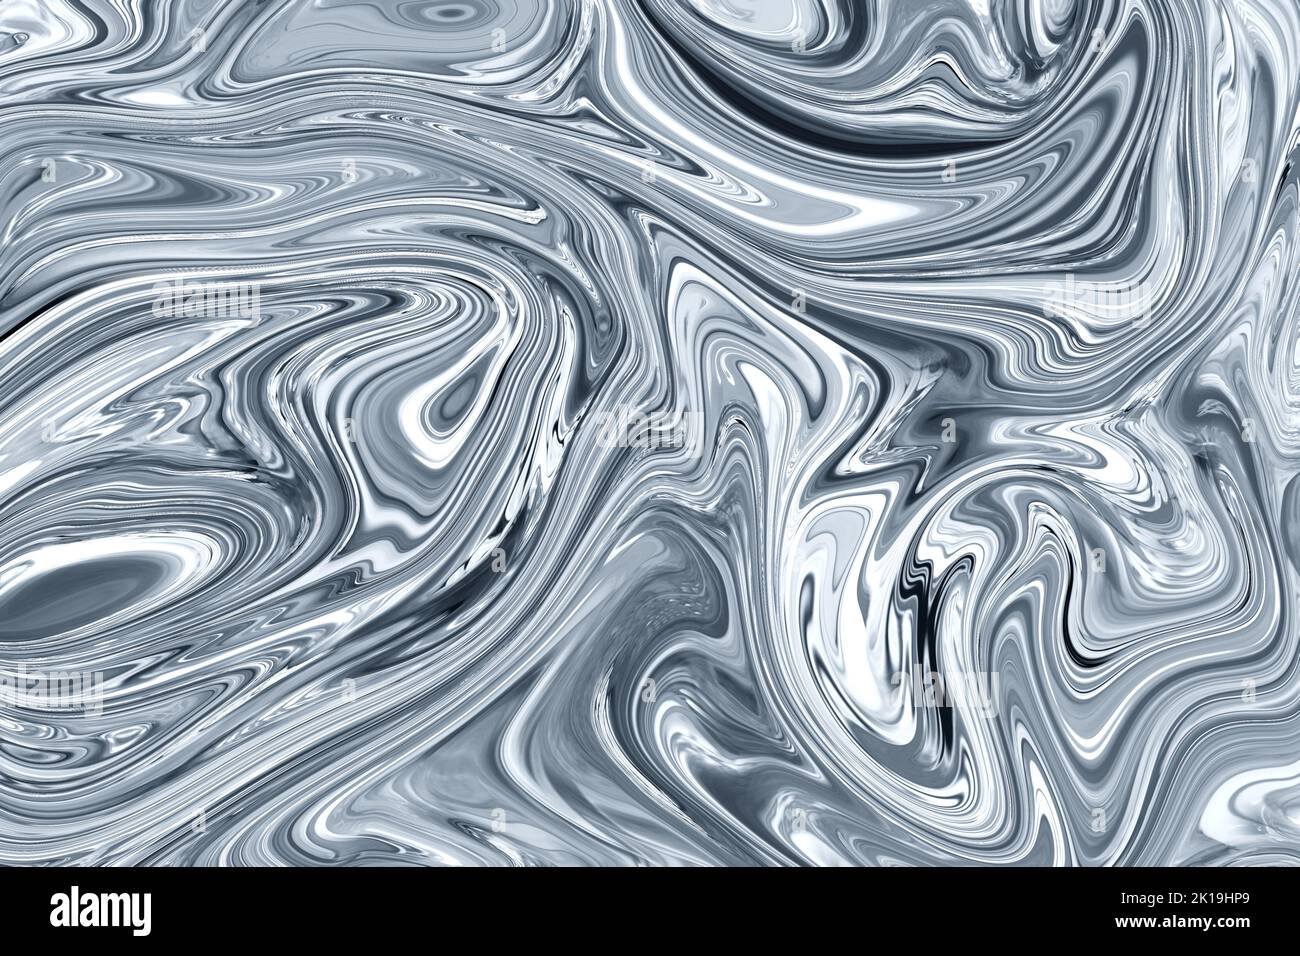 Liquid marble texture design, metallic marbling, shiny silver or chrome surface. High resolution vibrant abstract digital paint background. Stock Photo